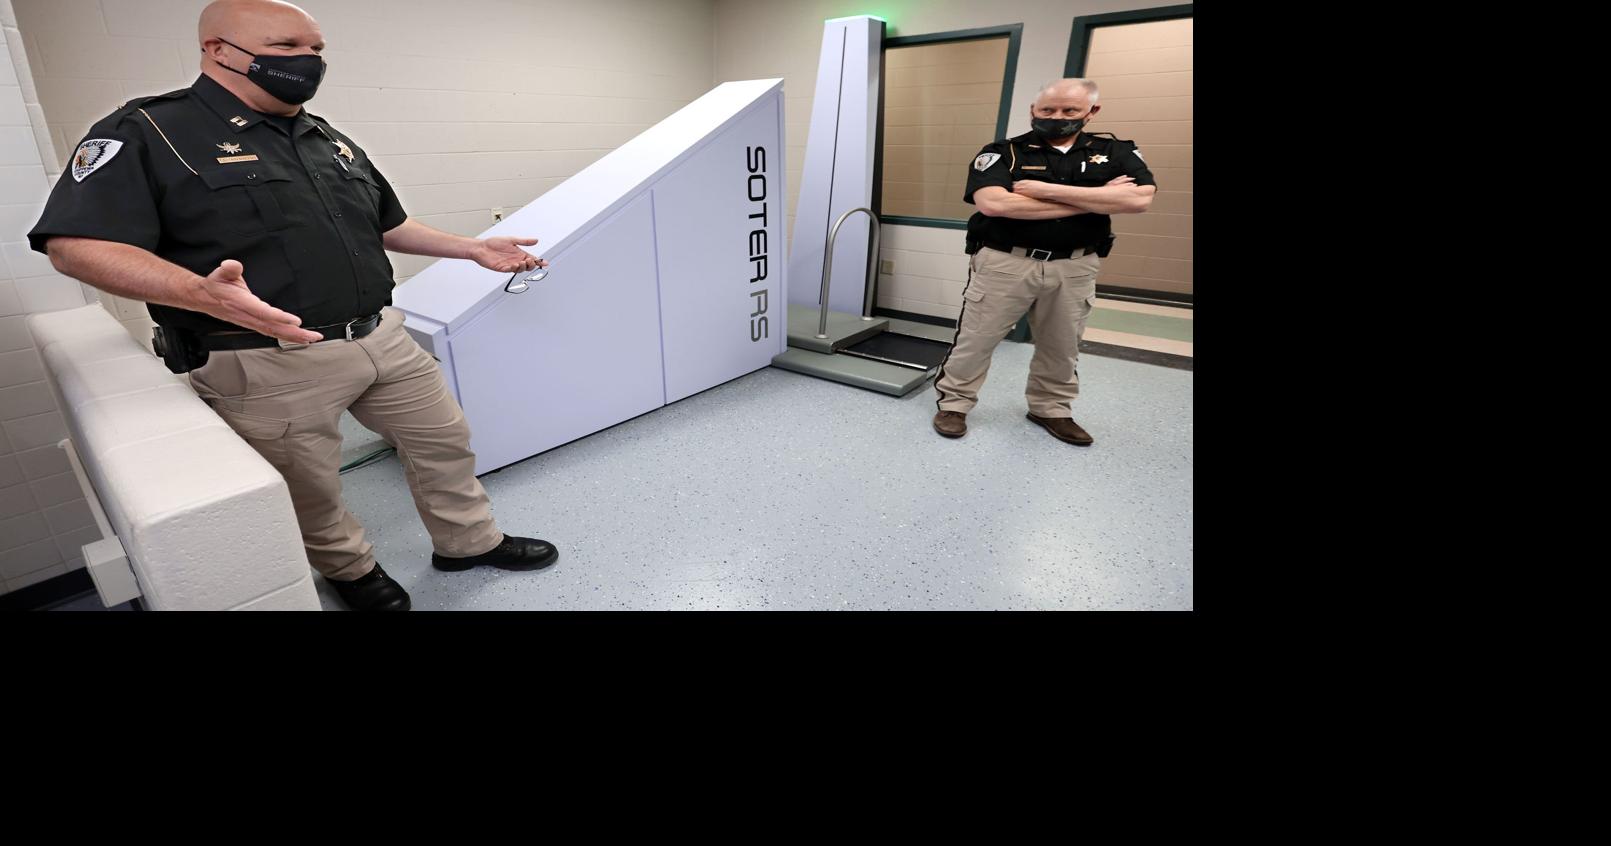 St. Joe Co. Jail unveils full-body scanner to search inmates